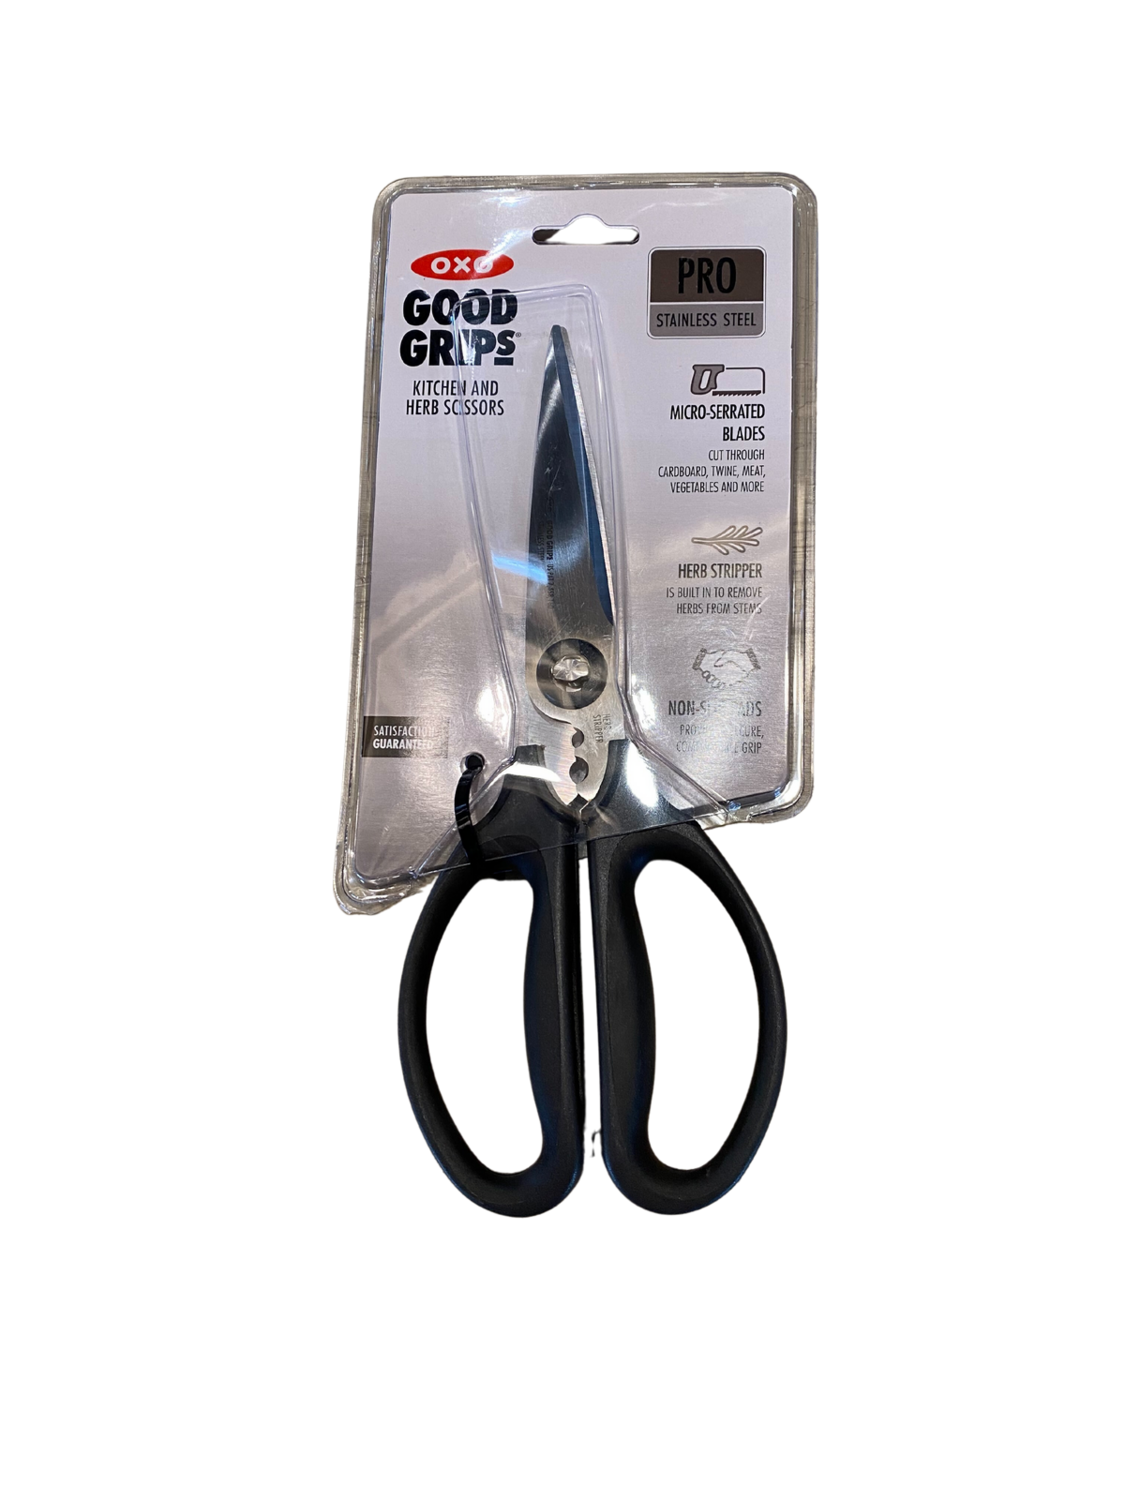 OXO KITCHEN AND HERB SCISSORS